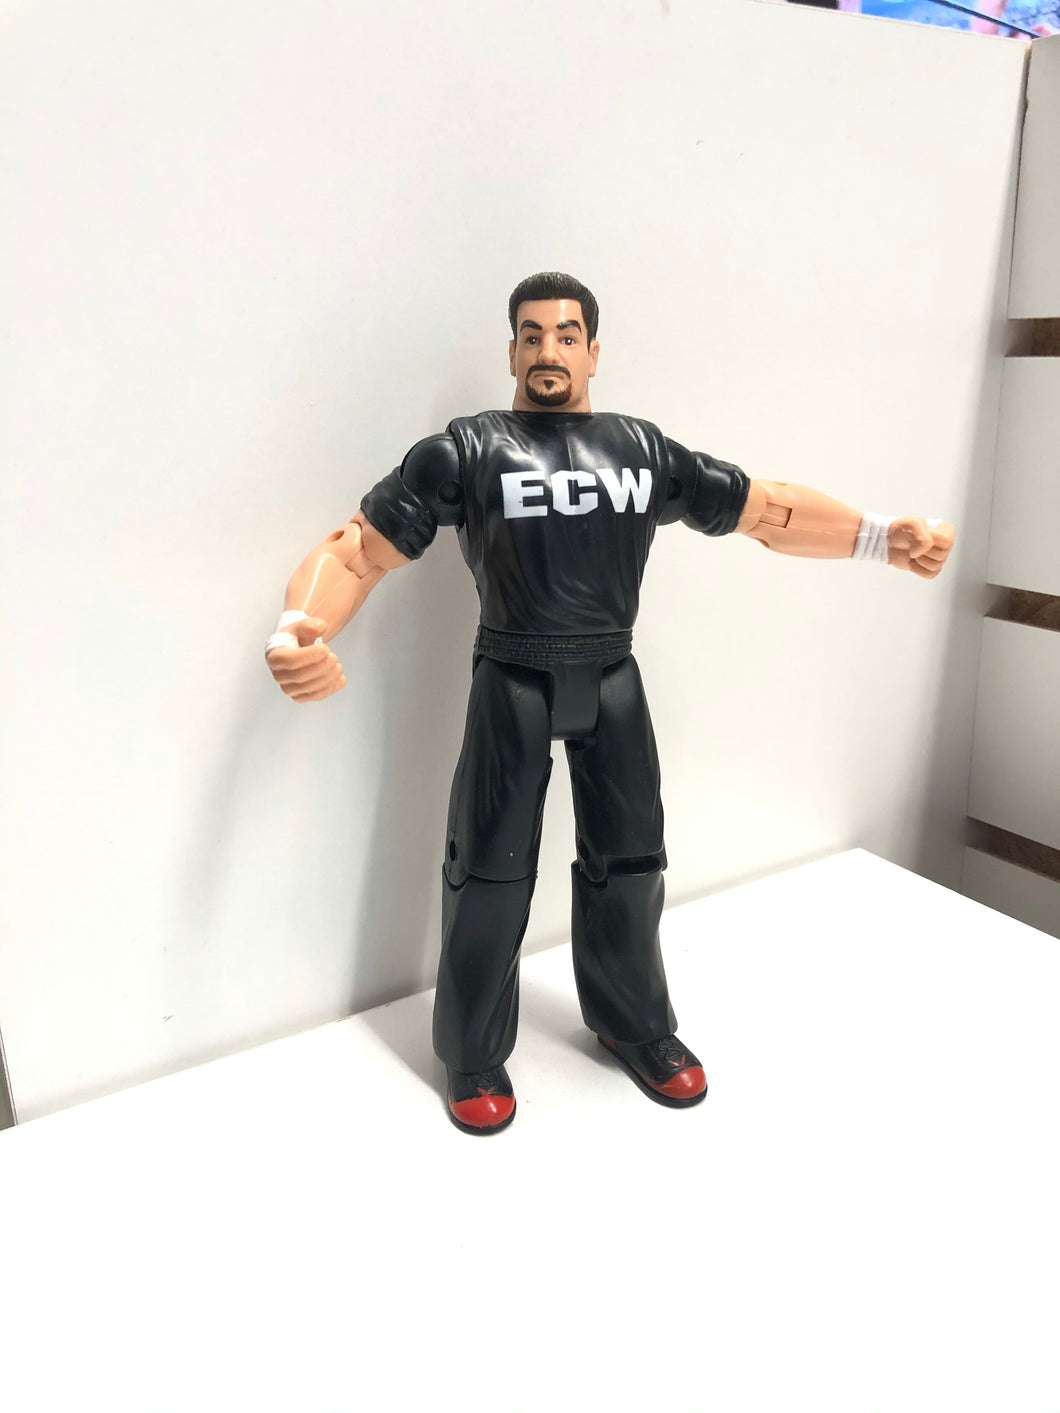 ECW Tommy Dreamer Action Figure